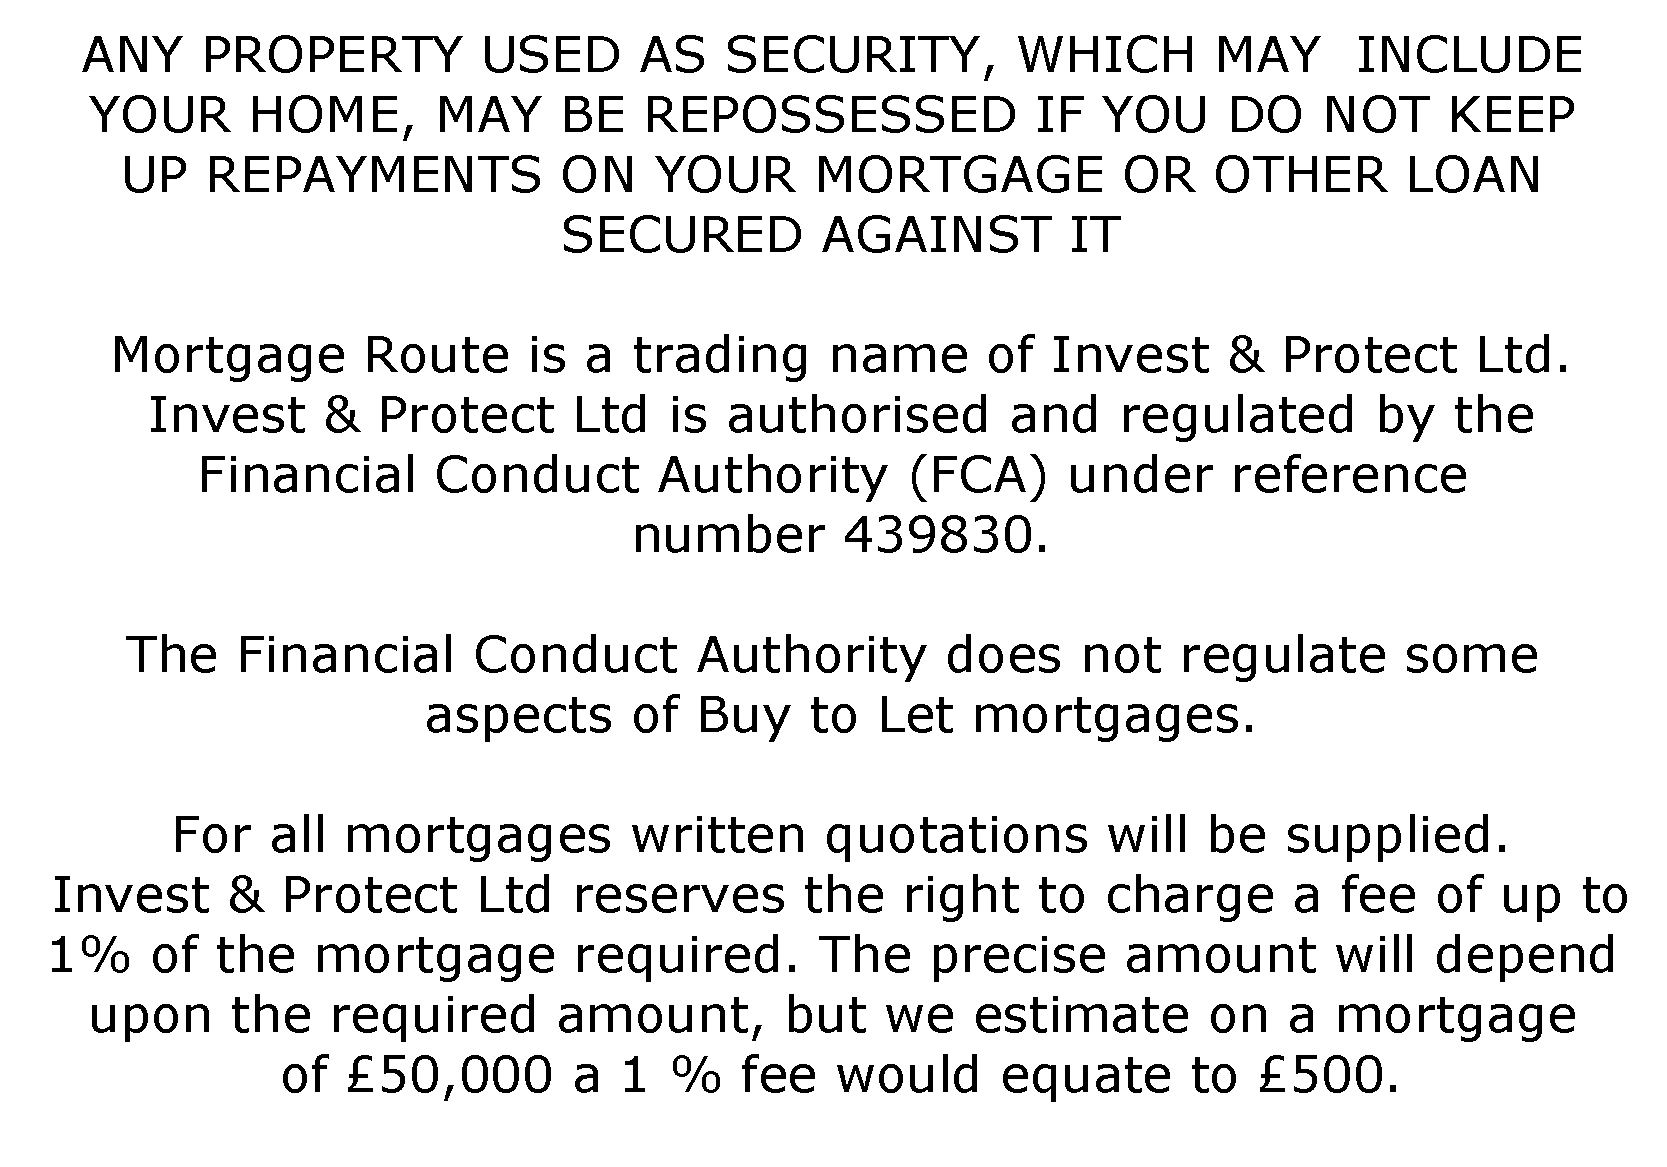 FSA declaration and important text about mortgage advice